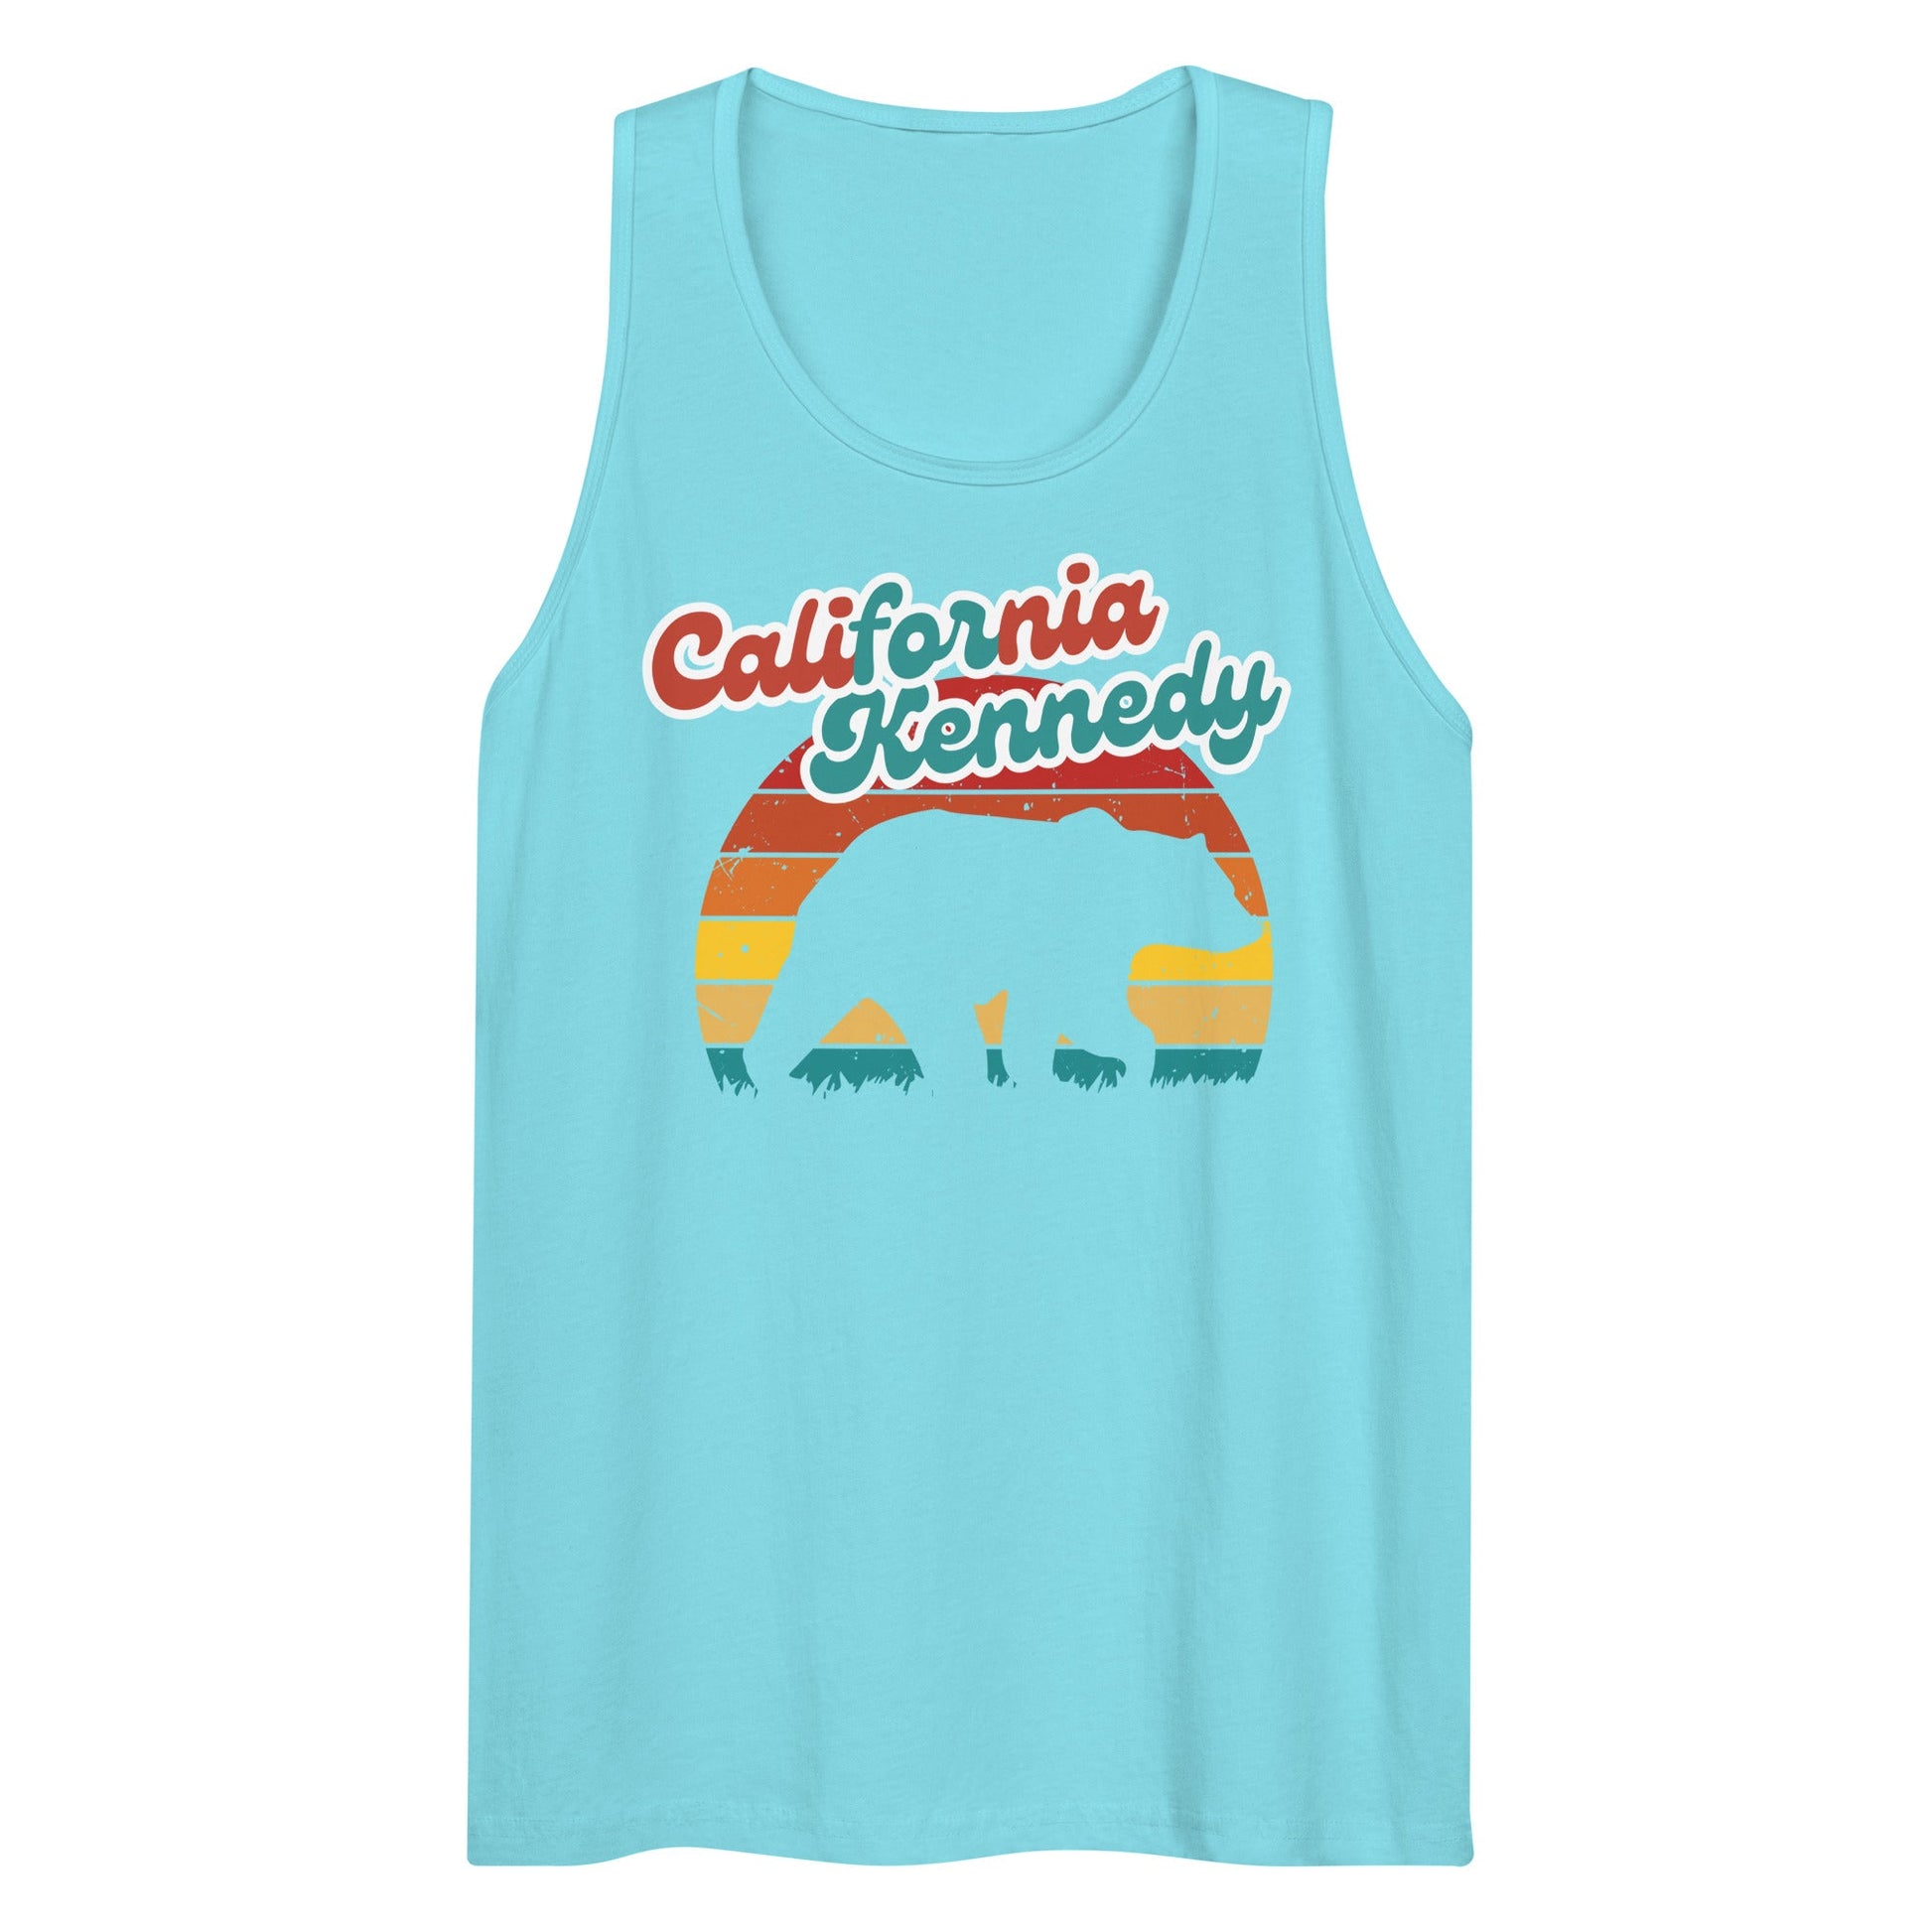 California for Kennedy Bear Men’s Tank Top - TEAM KENNEDY. All rights reserved